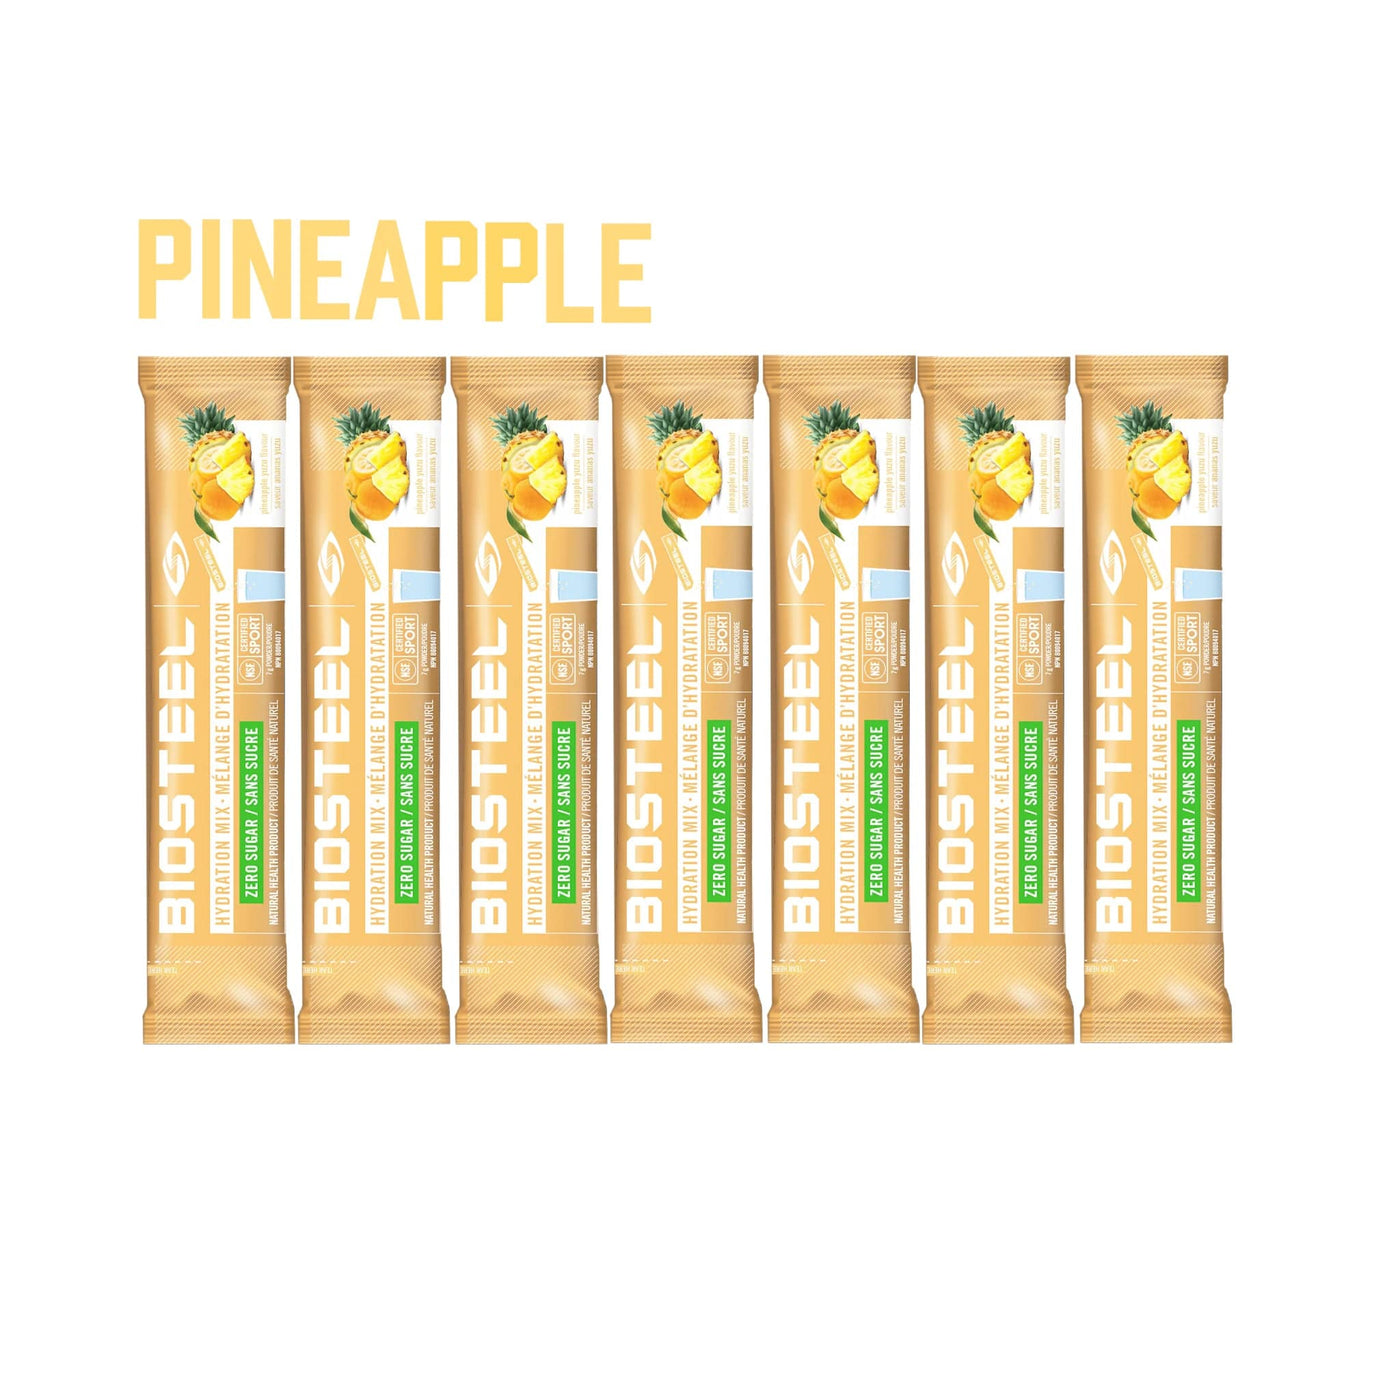 BioSteel High Performance Sports Mix - Pineapple Passion Fruit (7ct) - The Hockey Shop Source For Sports